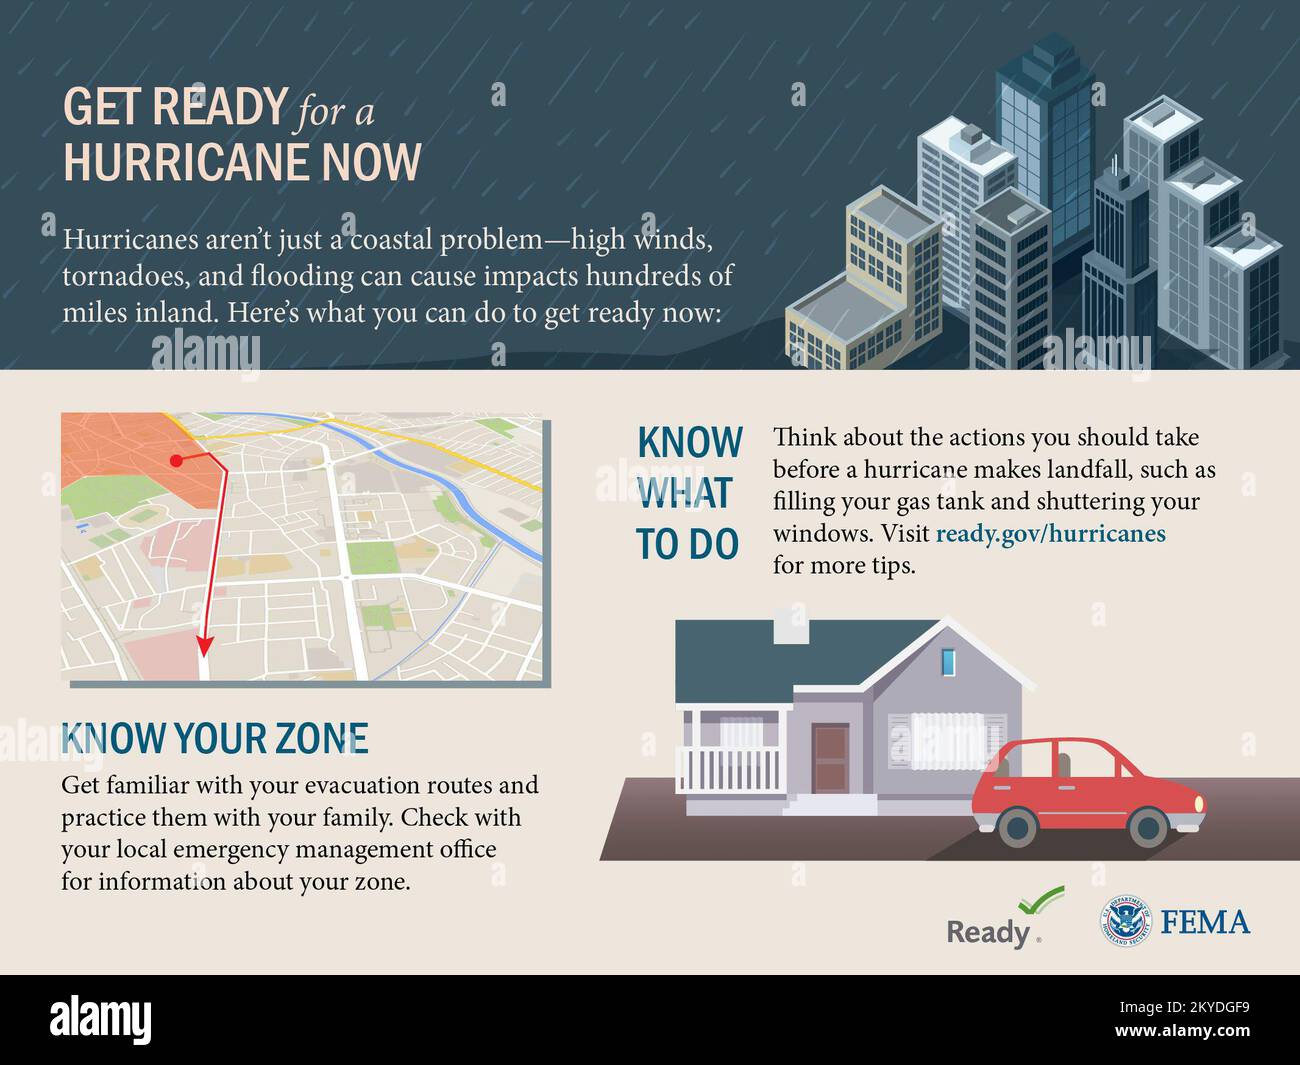 This graphic shares what you can do to get ready before a hurricane comes. 'Know your zone: Get familiar with your evacuation routes and practice them with your family. Know what to do: Think about the actions you should take before a hurricane makes landfall, such as filling your gas tank and shuttering your windows.'.. Photographs Relating to Disasters and Emergency Management Programs, Activities, and Officials Stock Photo